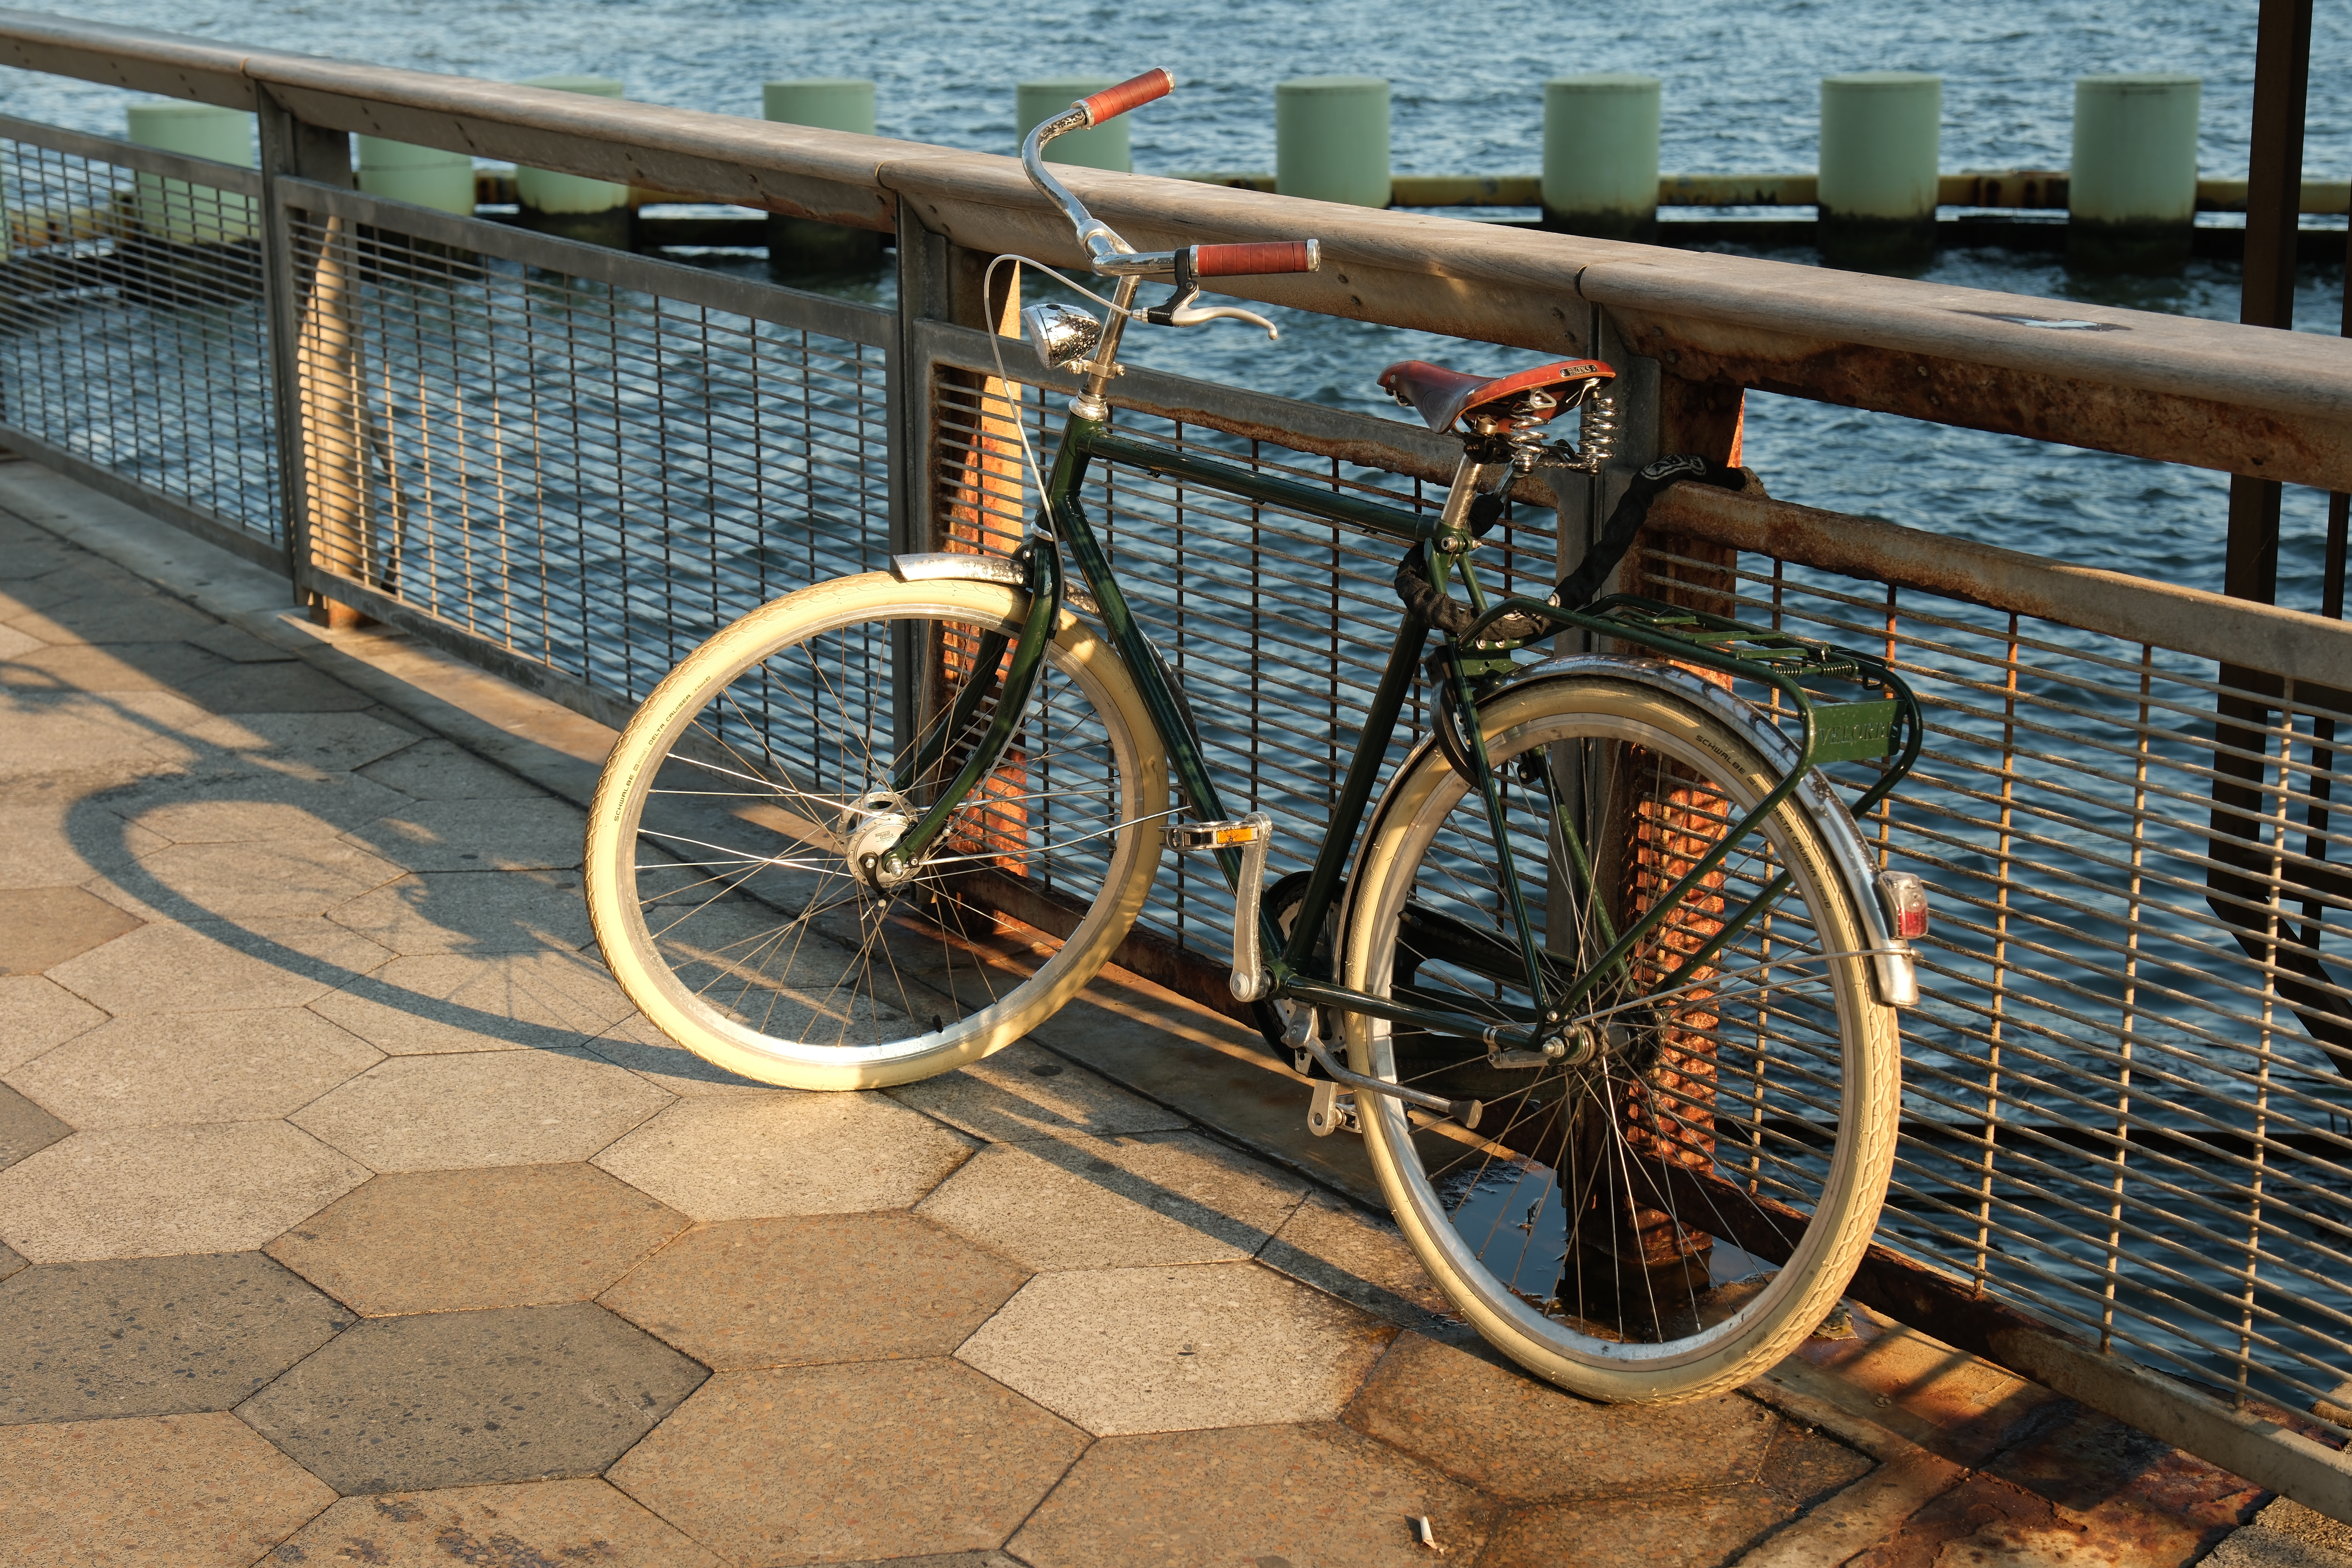 Classic bike next to East River, NY, 1/170s, f/5, ISO125, 35mm (53mm equivalent, with 16-55mm f2.8 lens), Photo: Joshua Waller